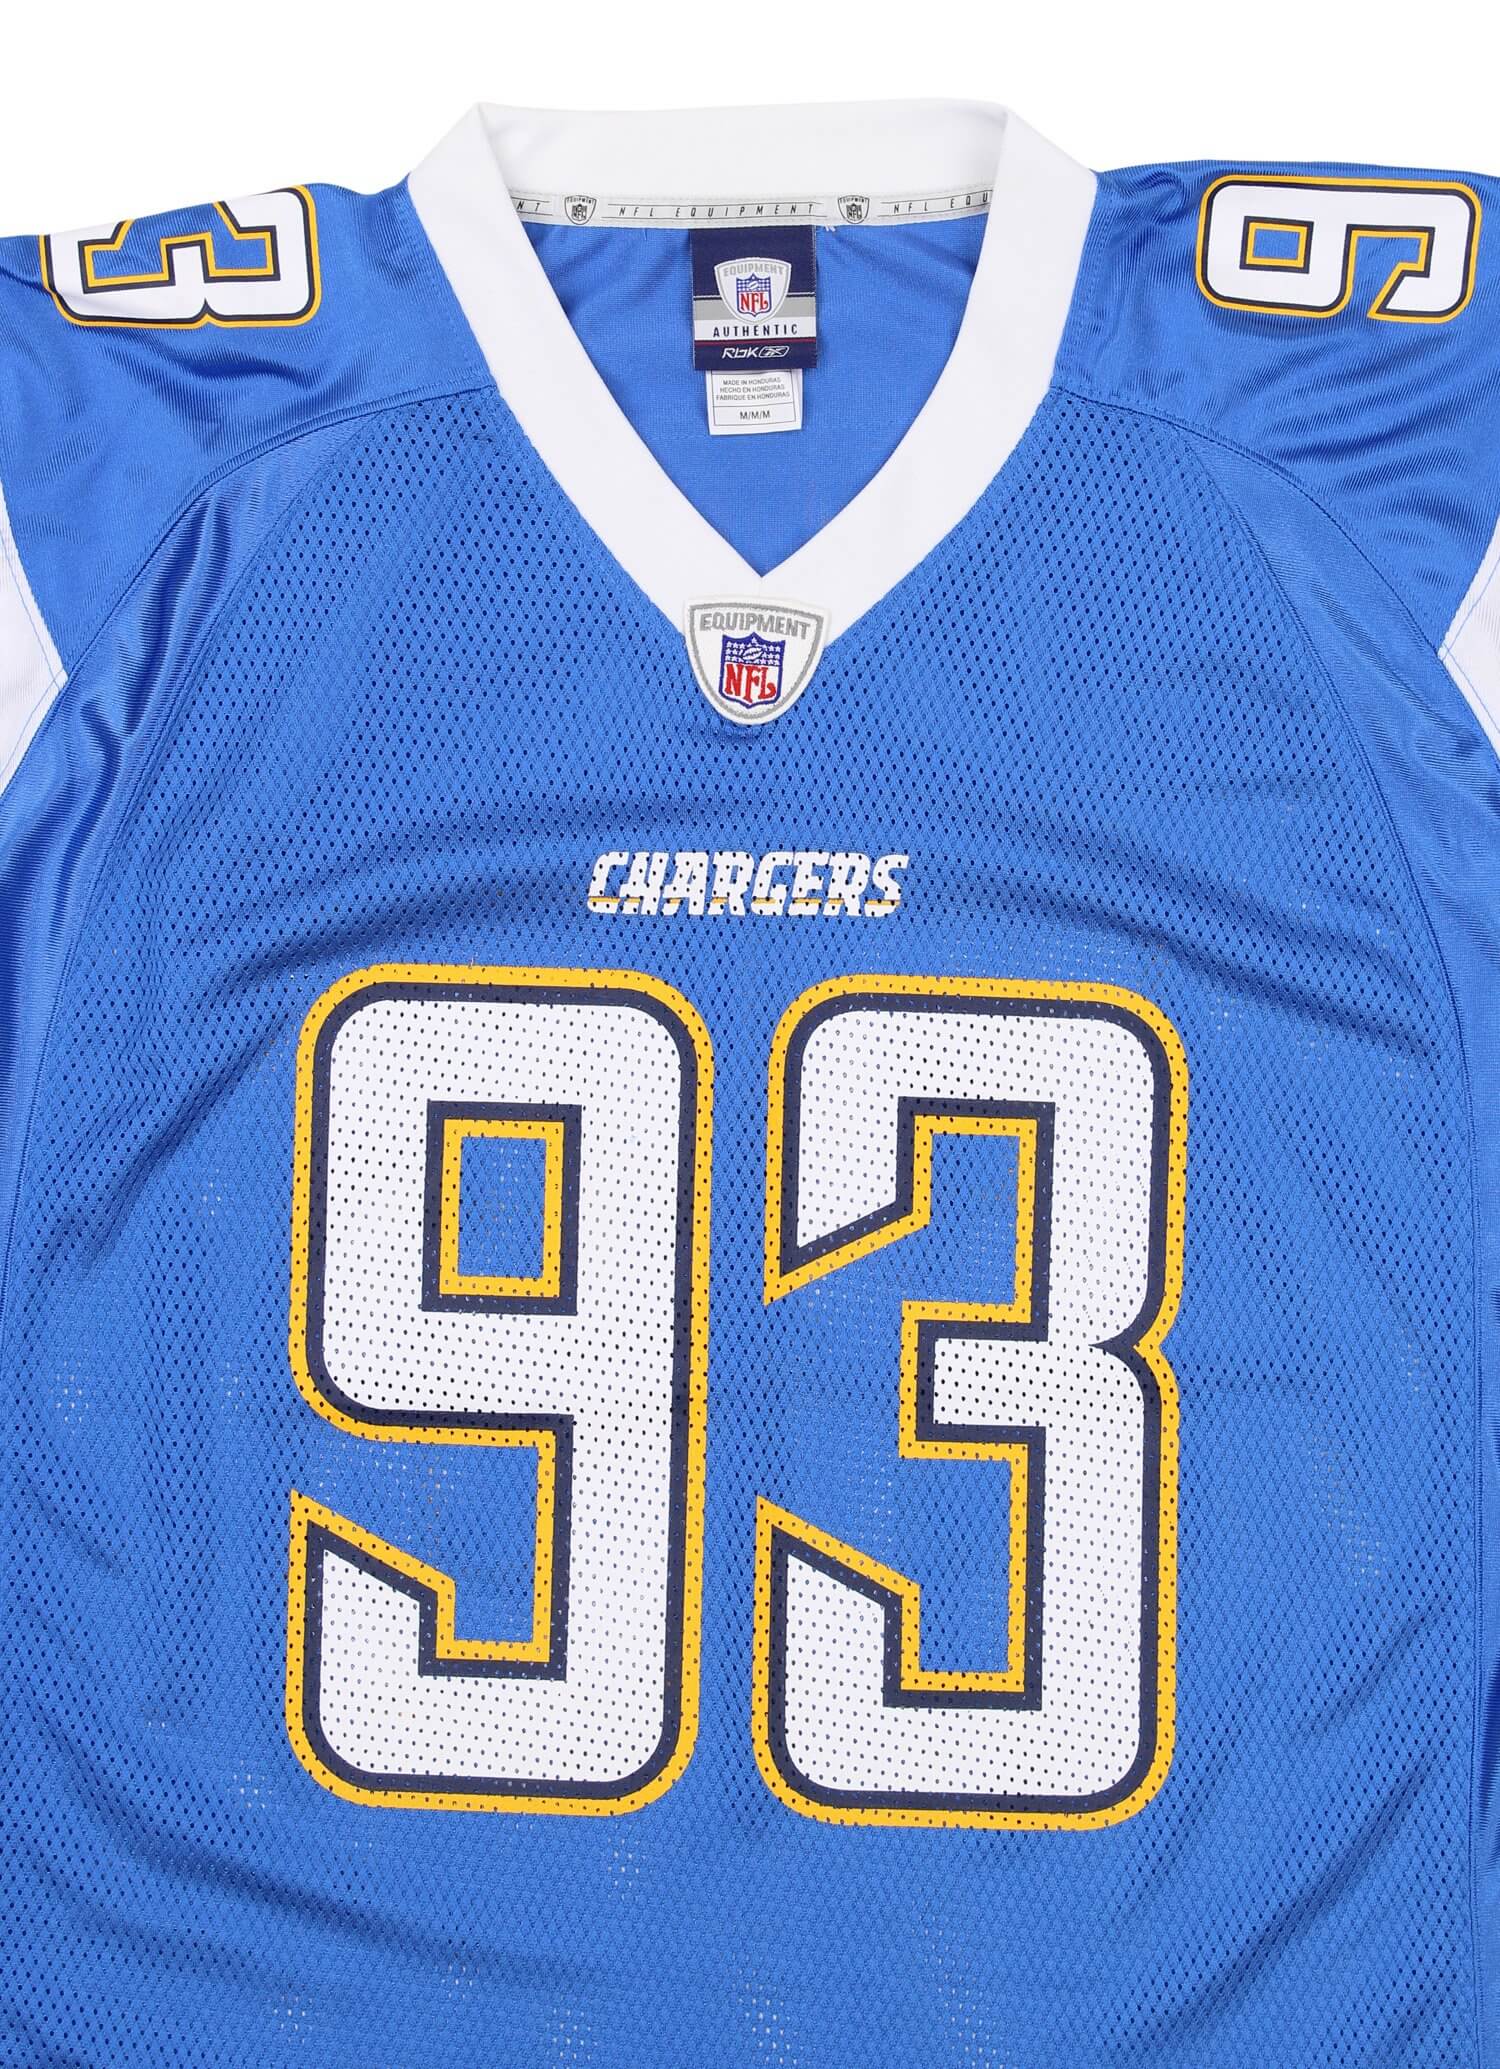 chargers basketball jersey